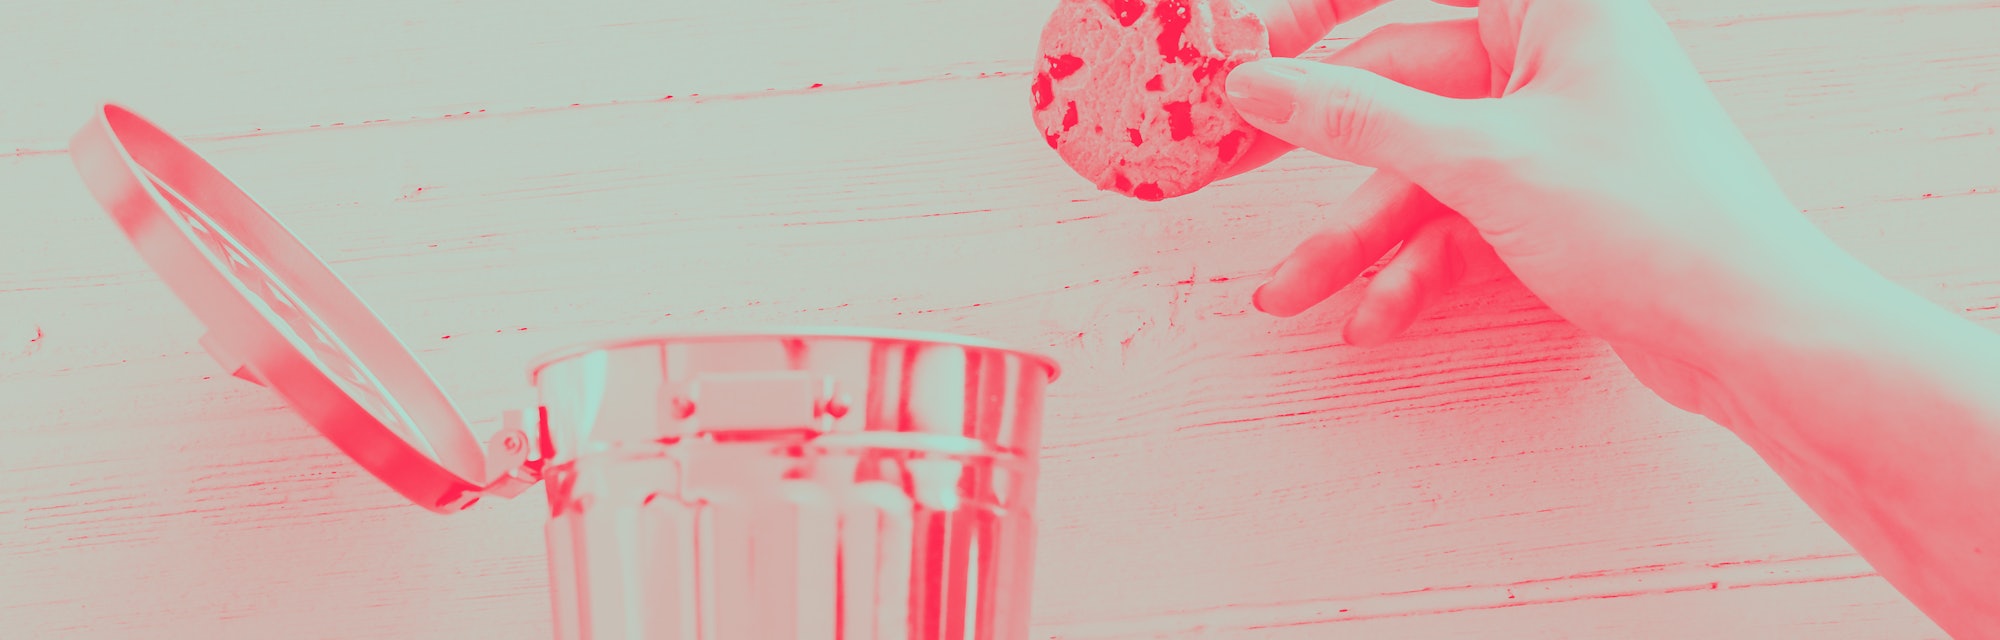 hand throwing cookie into a trash can, metaphor about website cookies and user tracking technologies